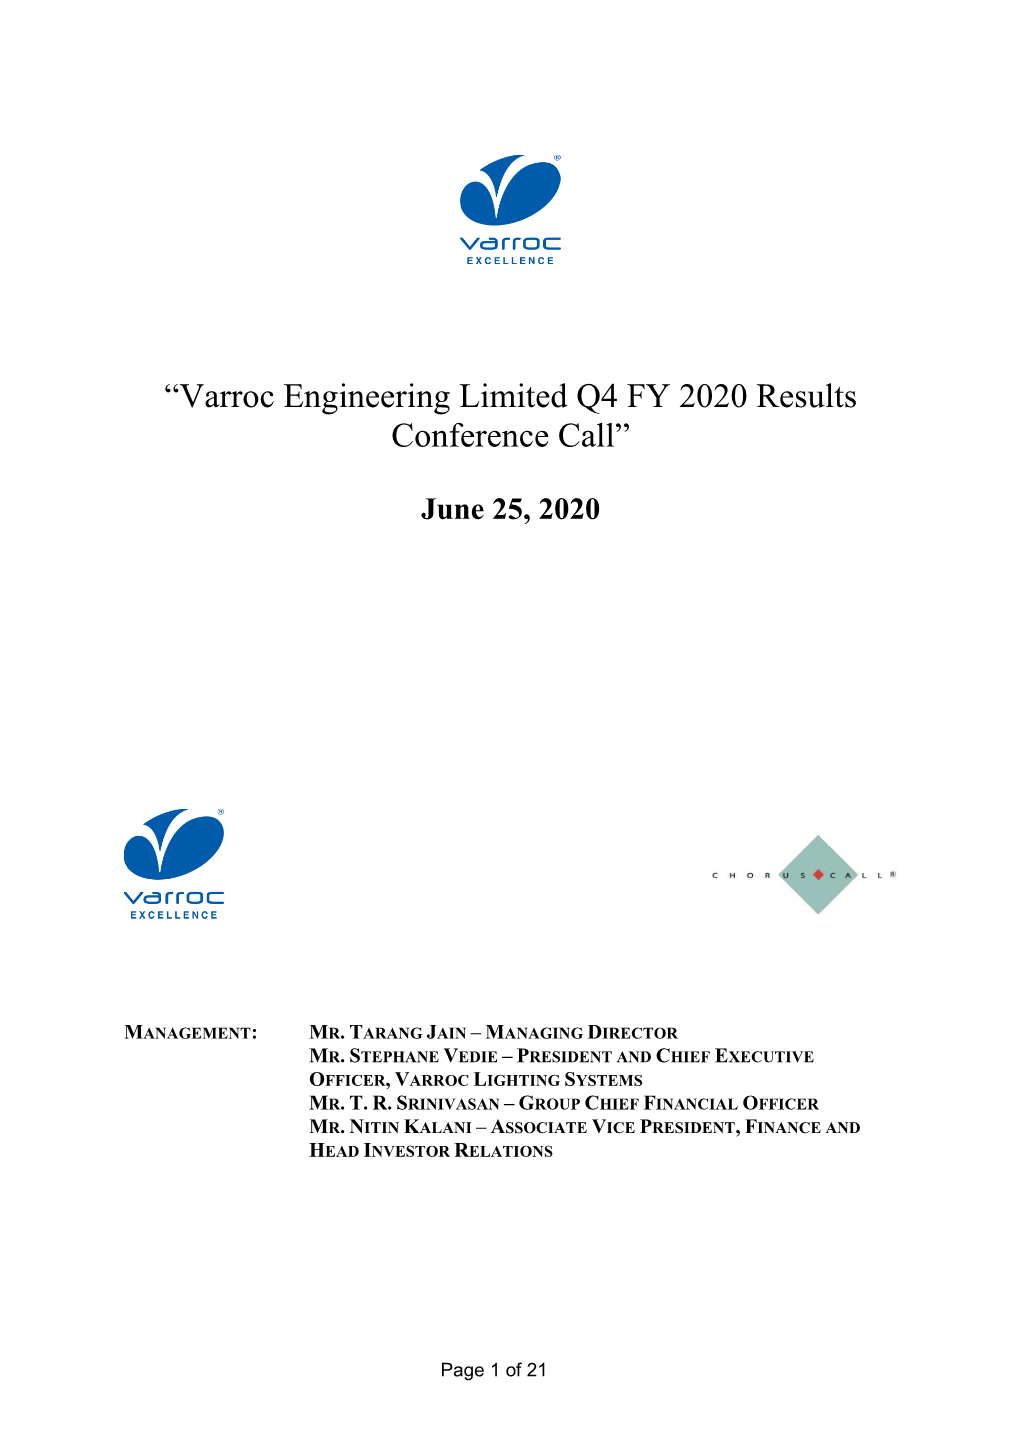 “Varroc Engineering Limited Q4 FY 2020 Results Conference Call”